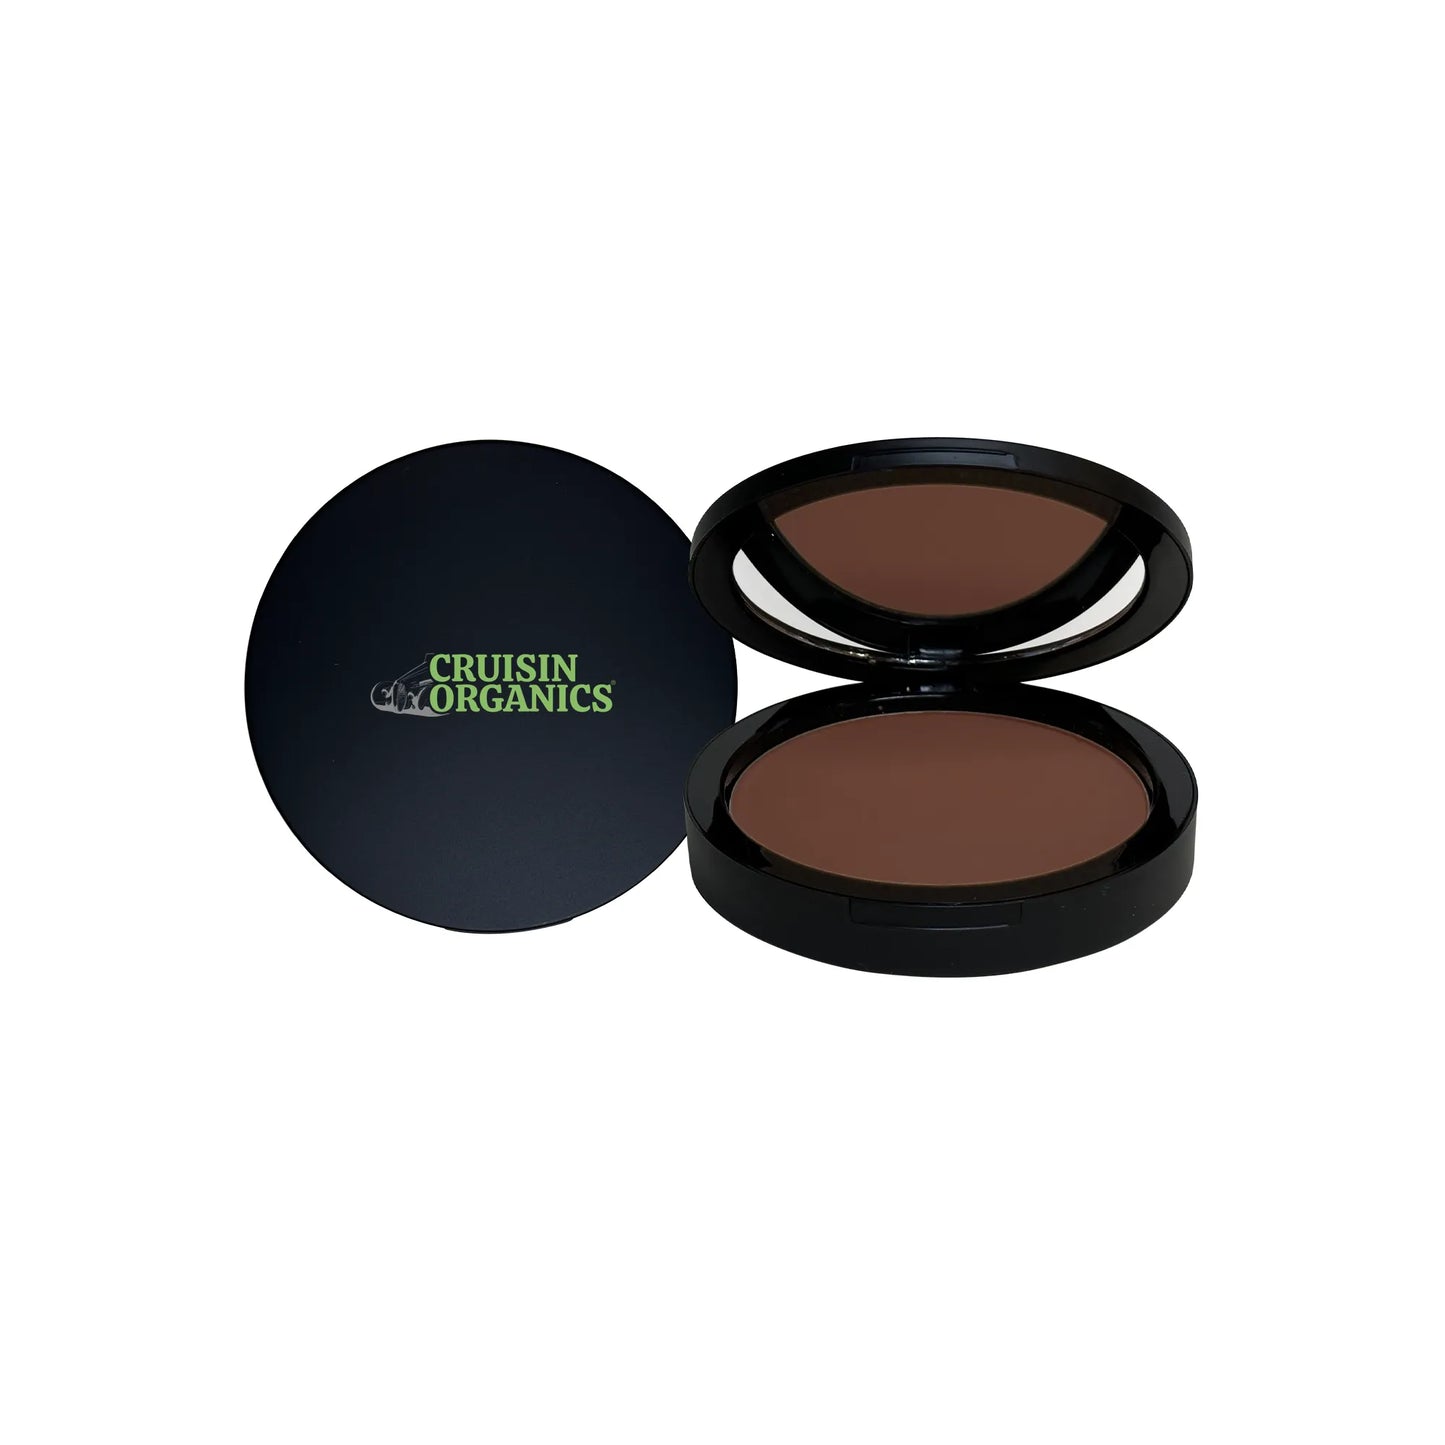 Cruisin Organics Fig Powder Foundation. This compact dual blend powder offers customizable coverage, from sheer to full, perfect for on-the-go touch ups. Its weightless feel and versatility make it suitable for all skin types, leaving a radiant finish. Dare to explore the endless possibilities of this foundation and embrace your confidence.